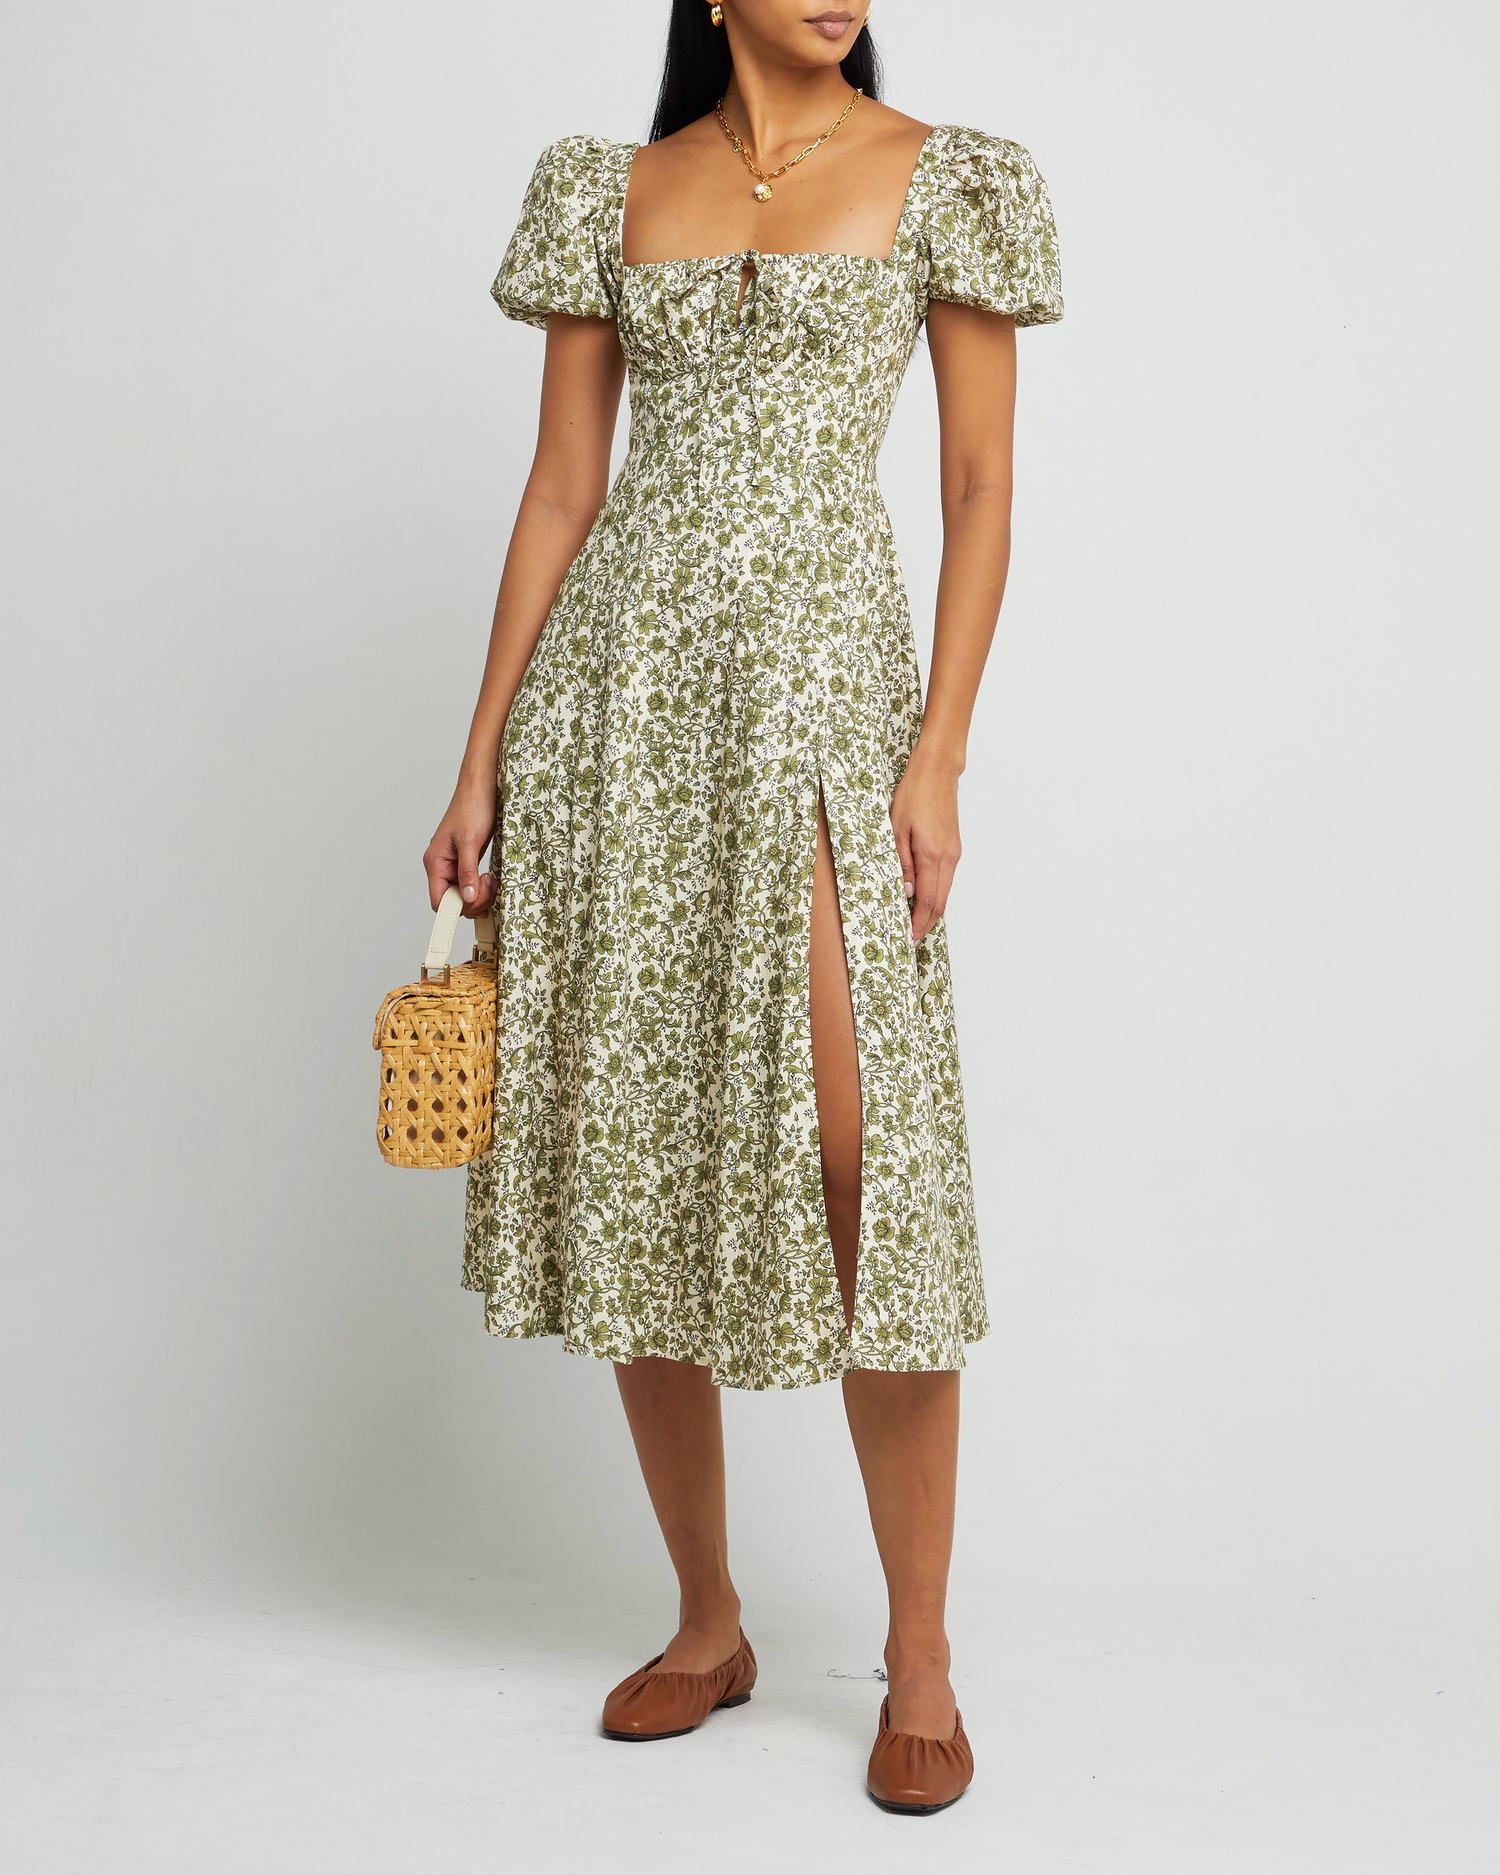 Fifth image of Cotton Peasant Dress, a green maxi dress, tie detail, puff sleeves, short sleeves, side slit